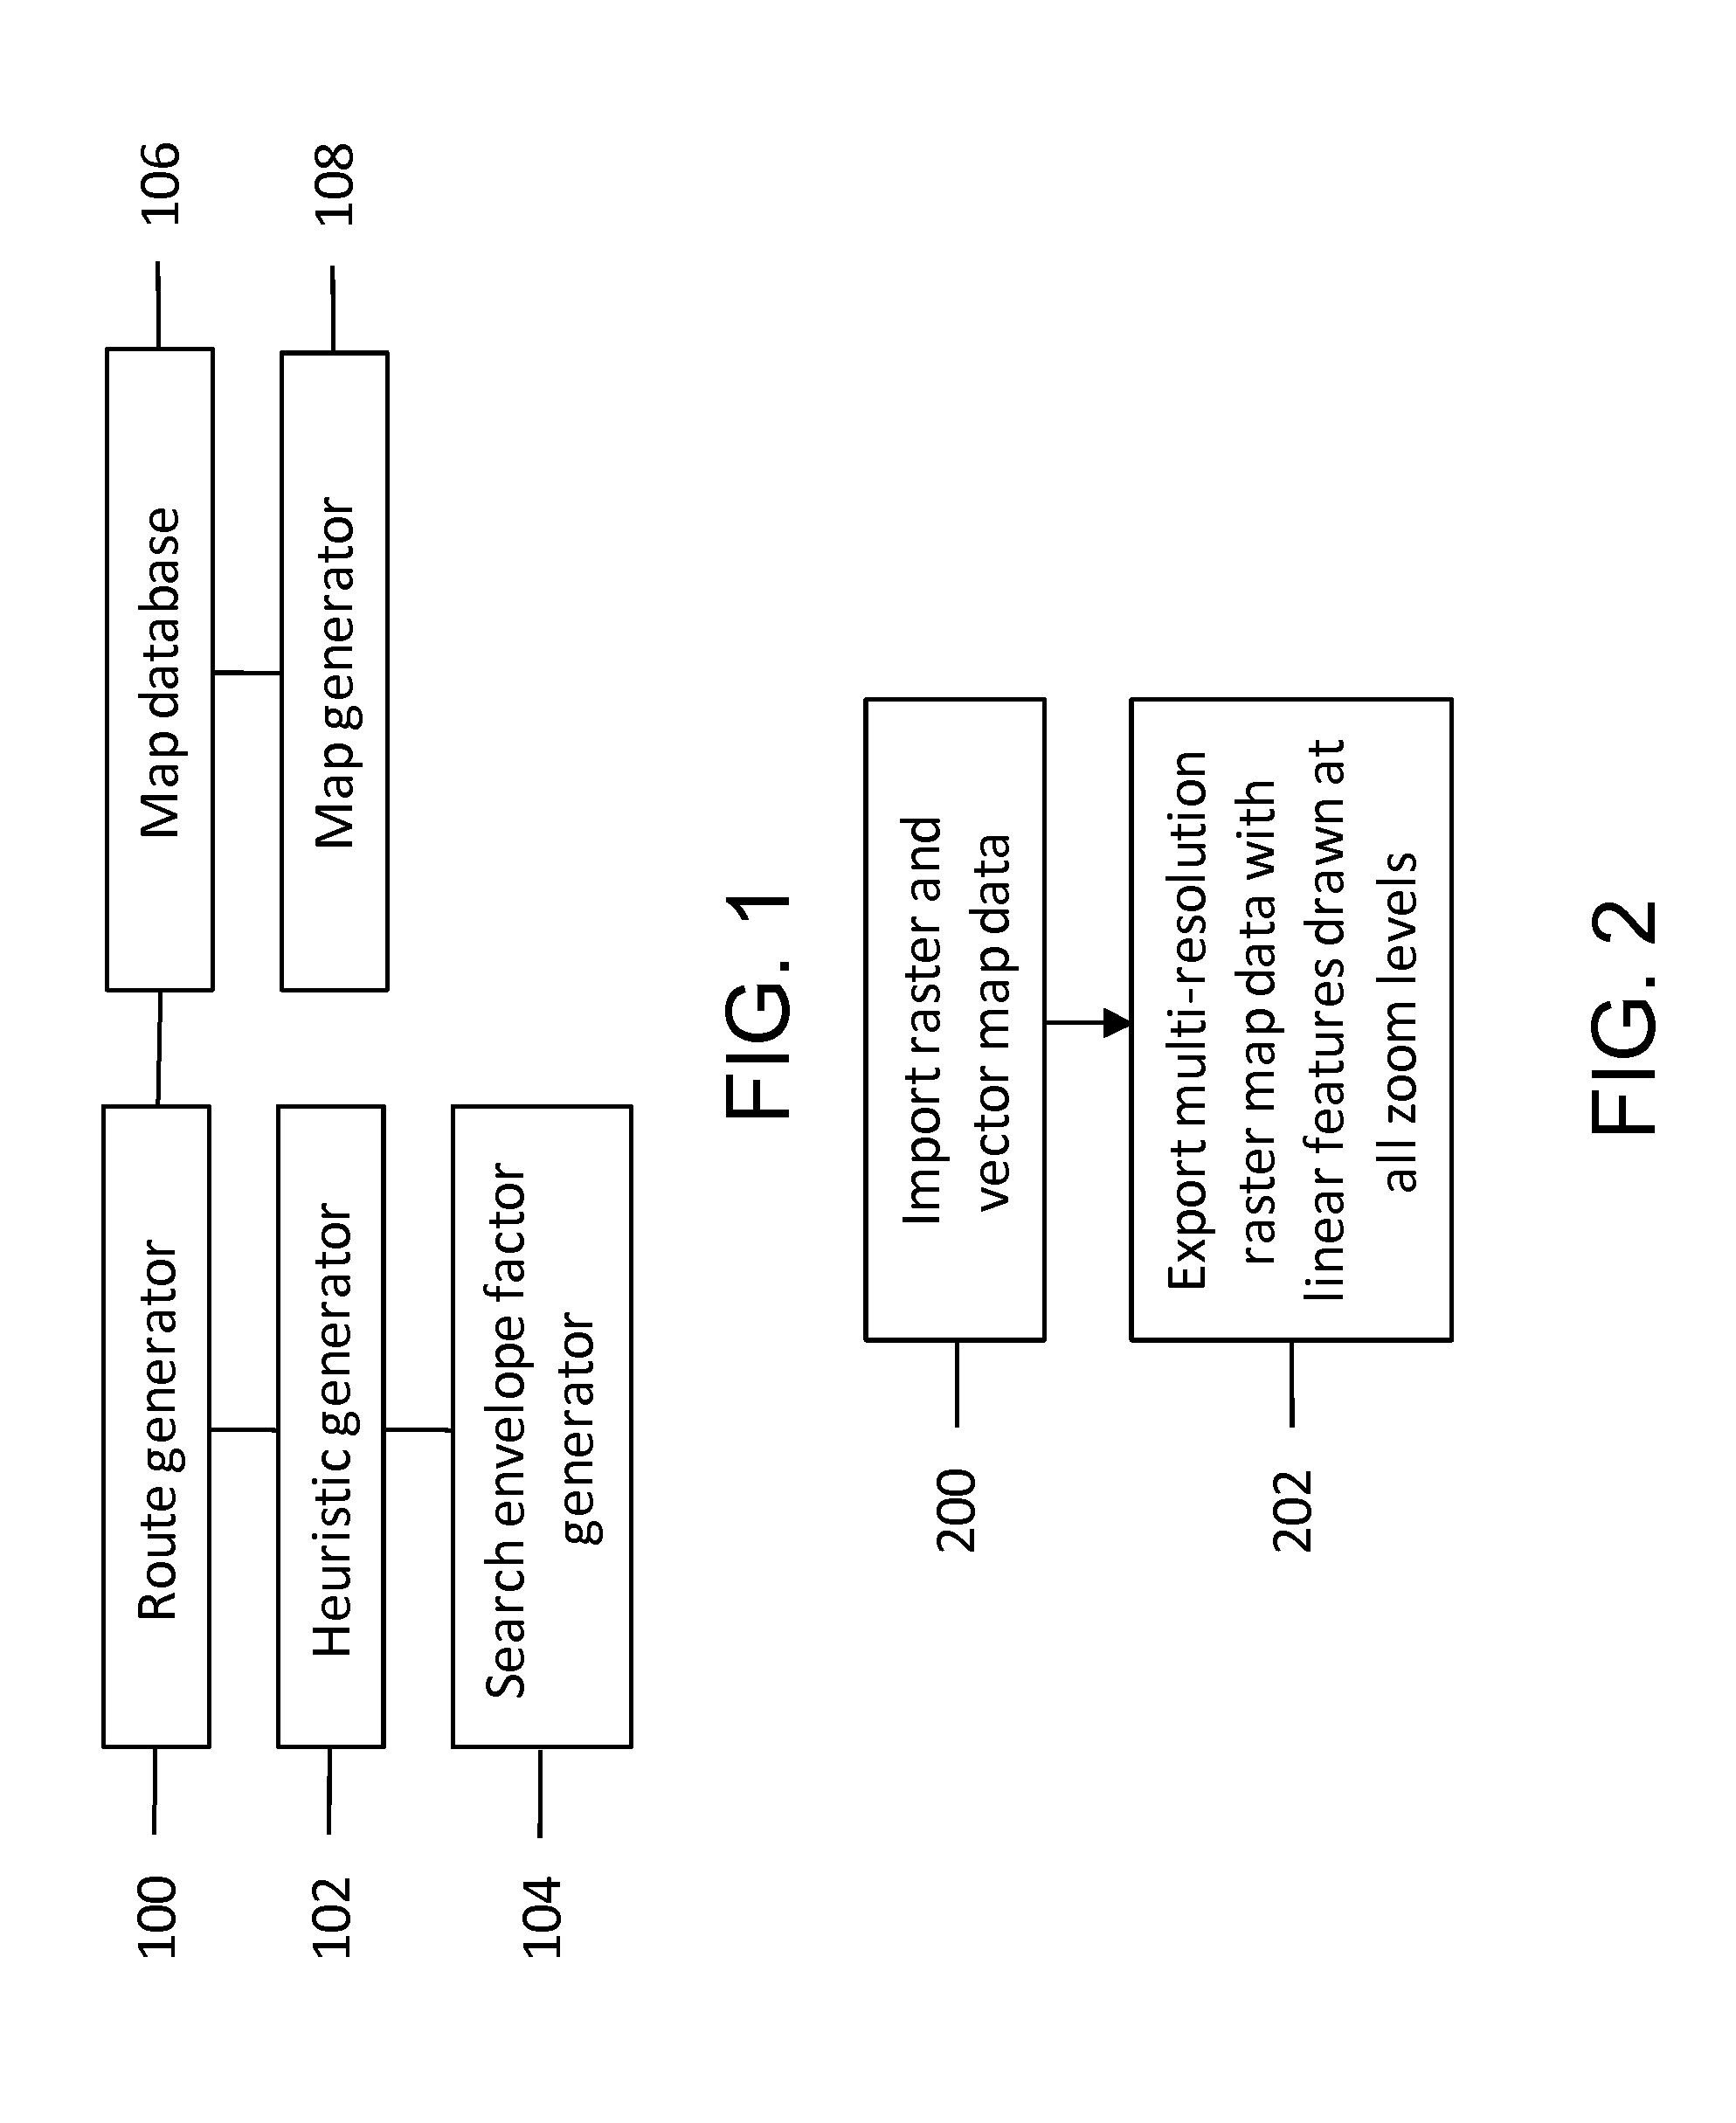 System and method for multi-resolution routing